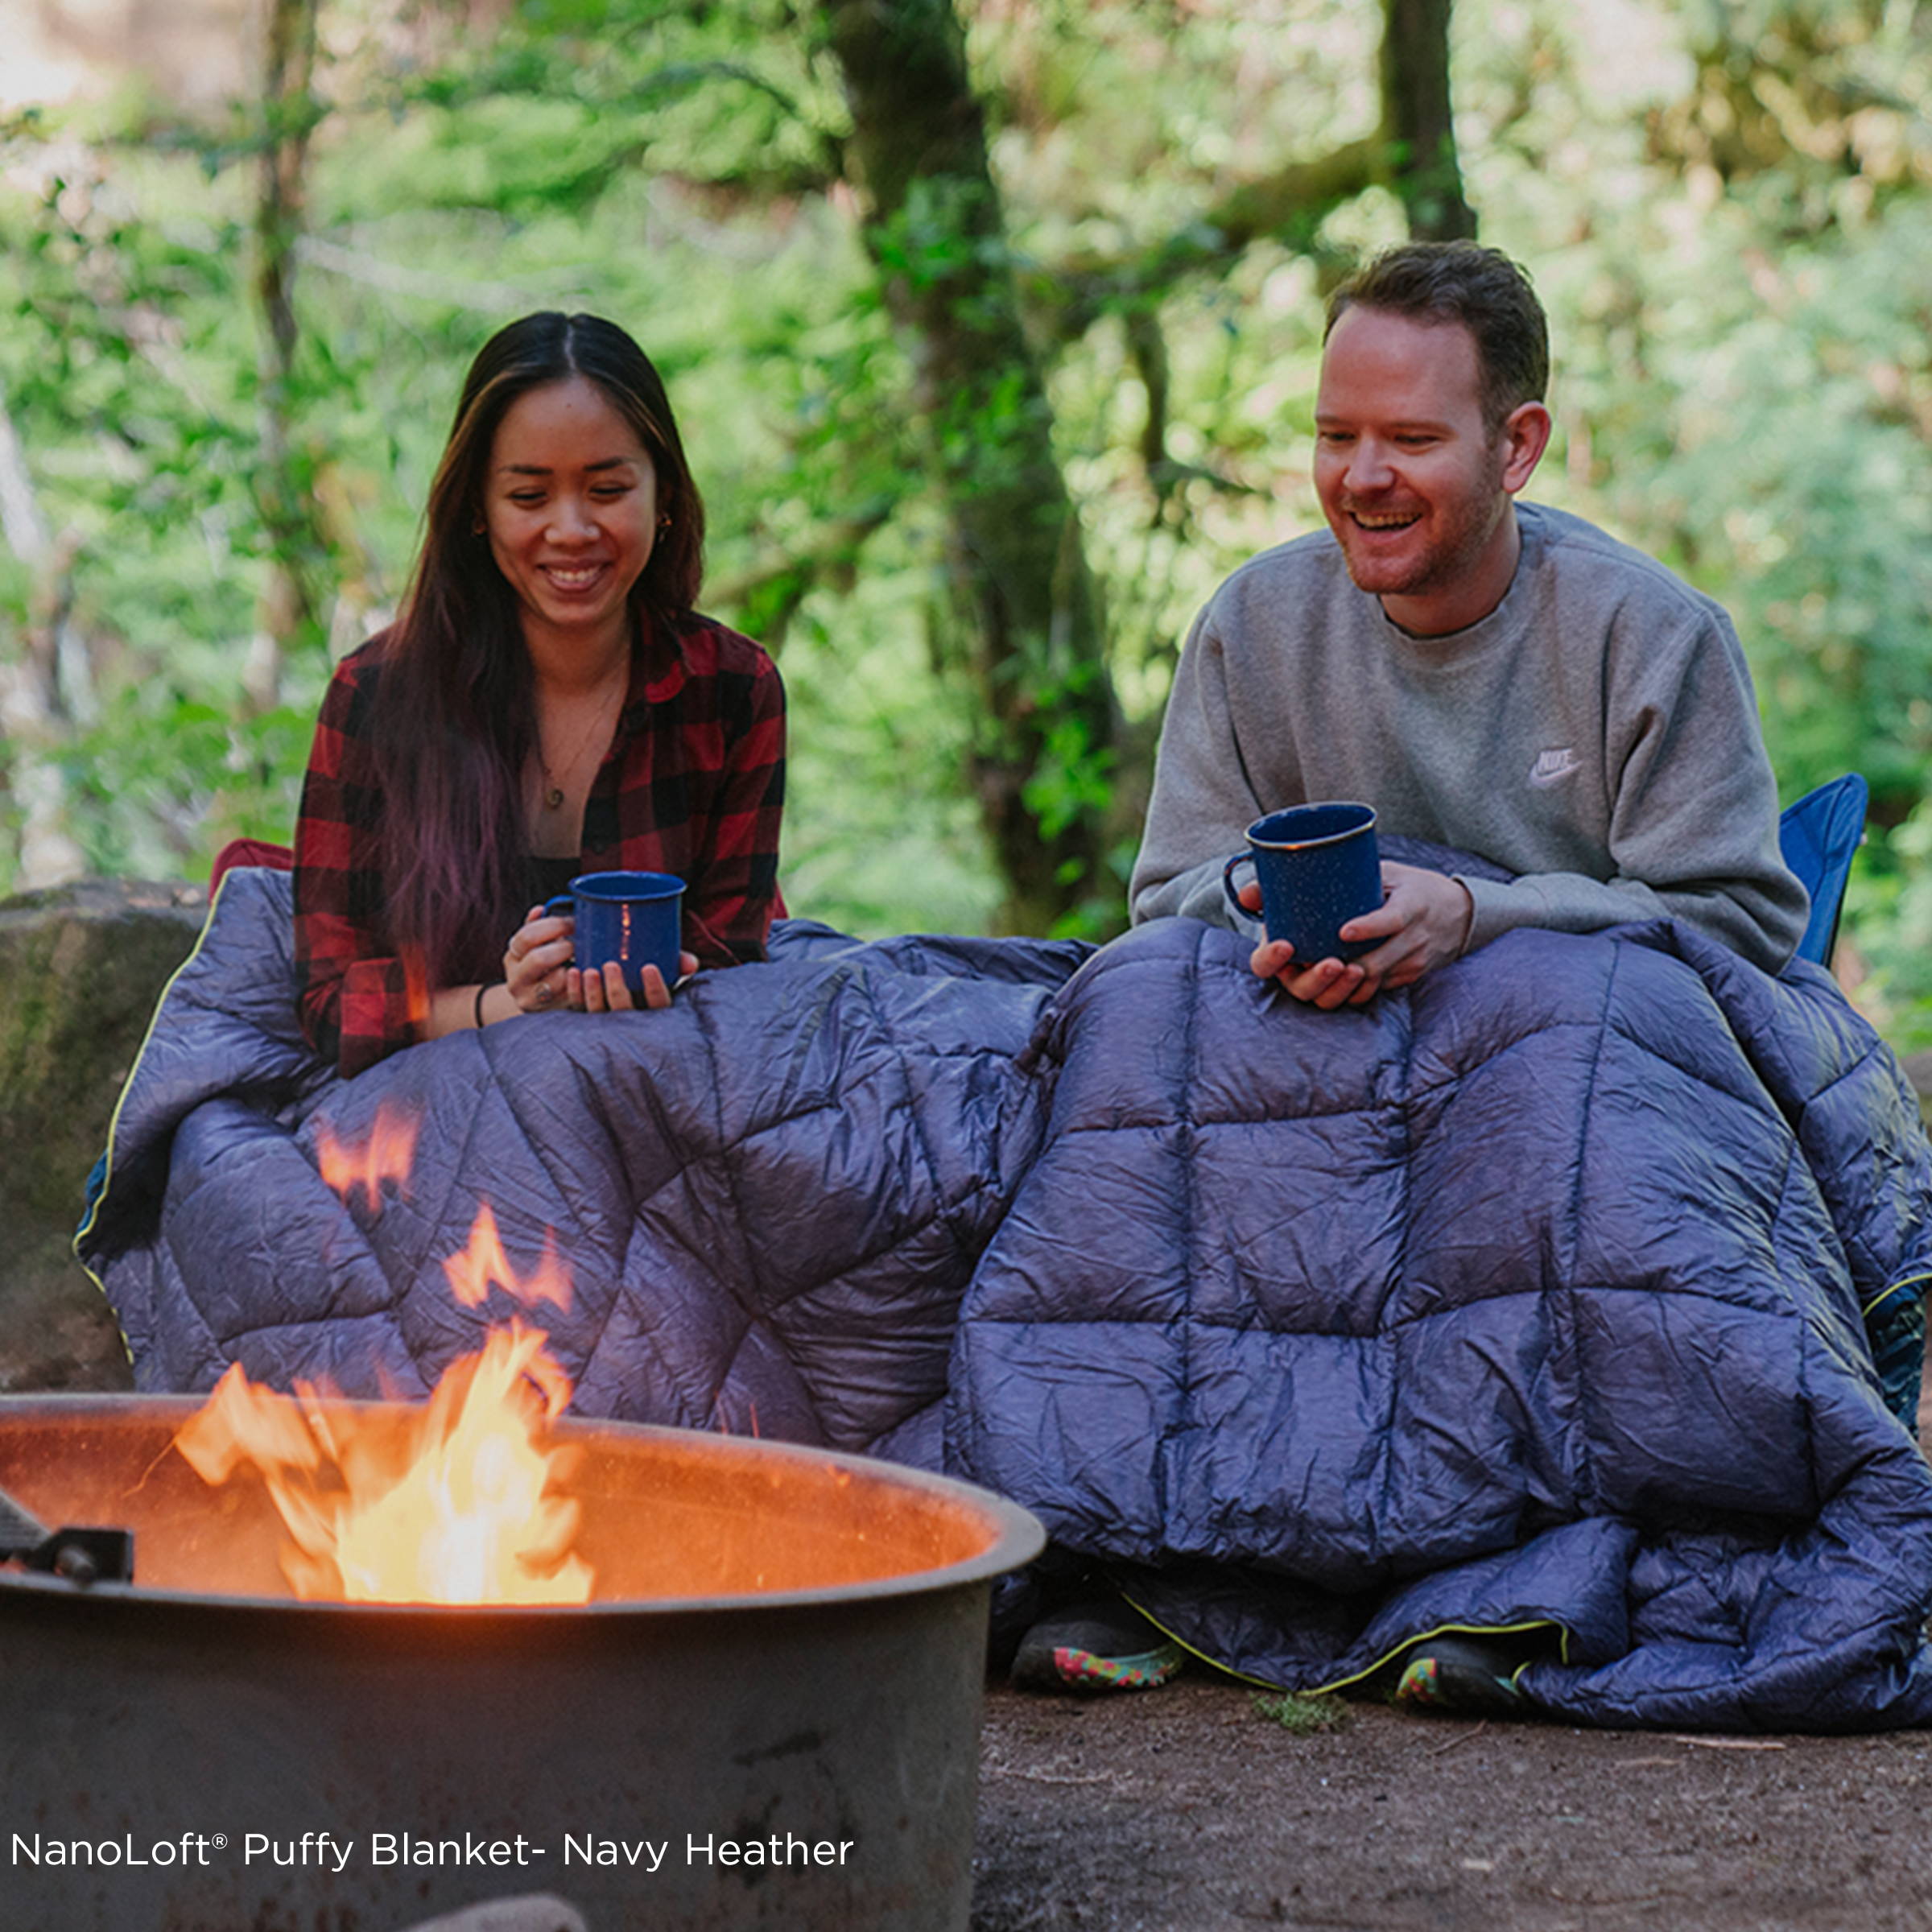 Man and woman wrapped in Rumpl Blanket in Front of Campfire